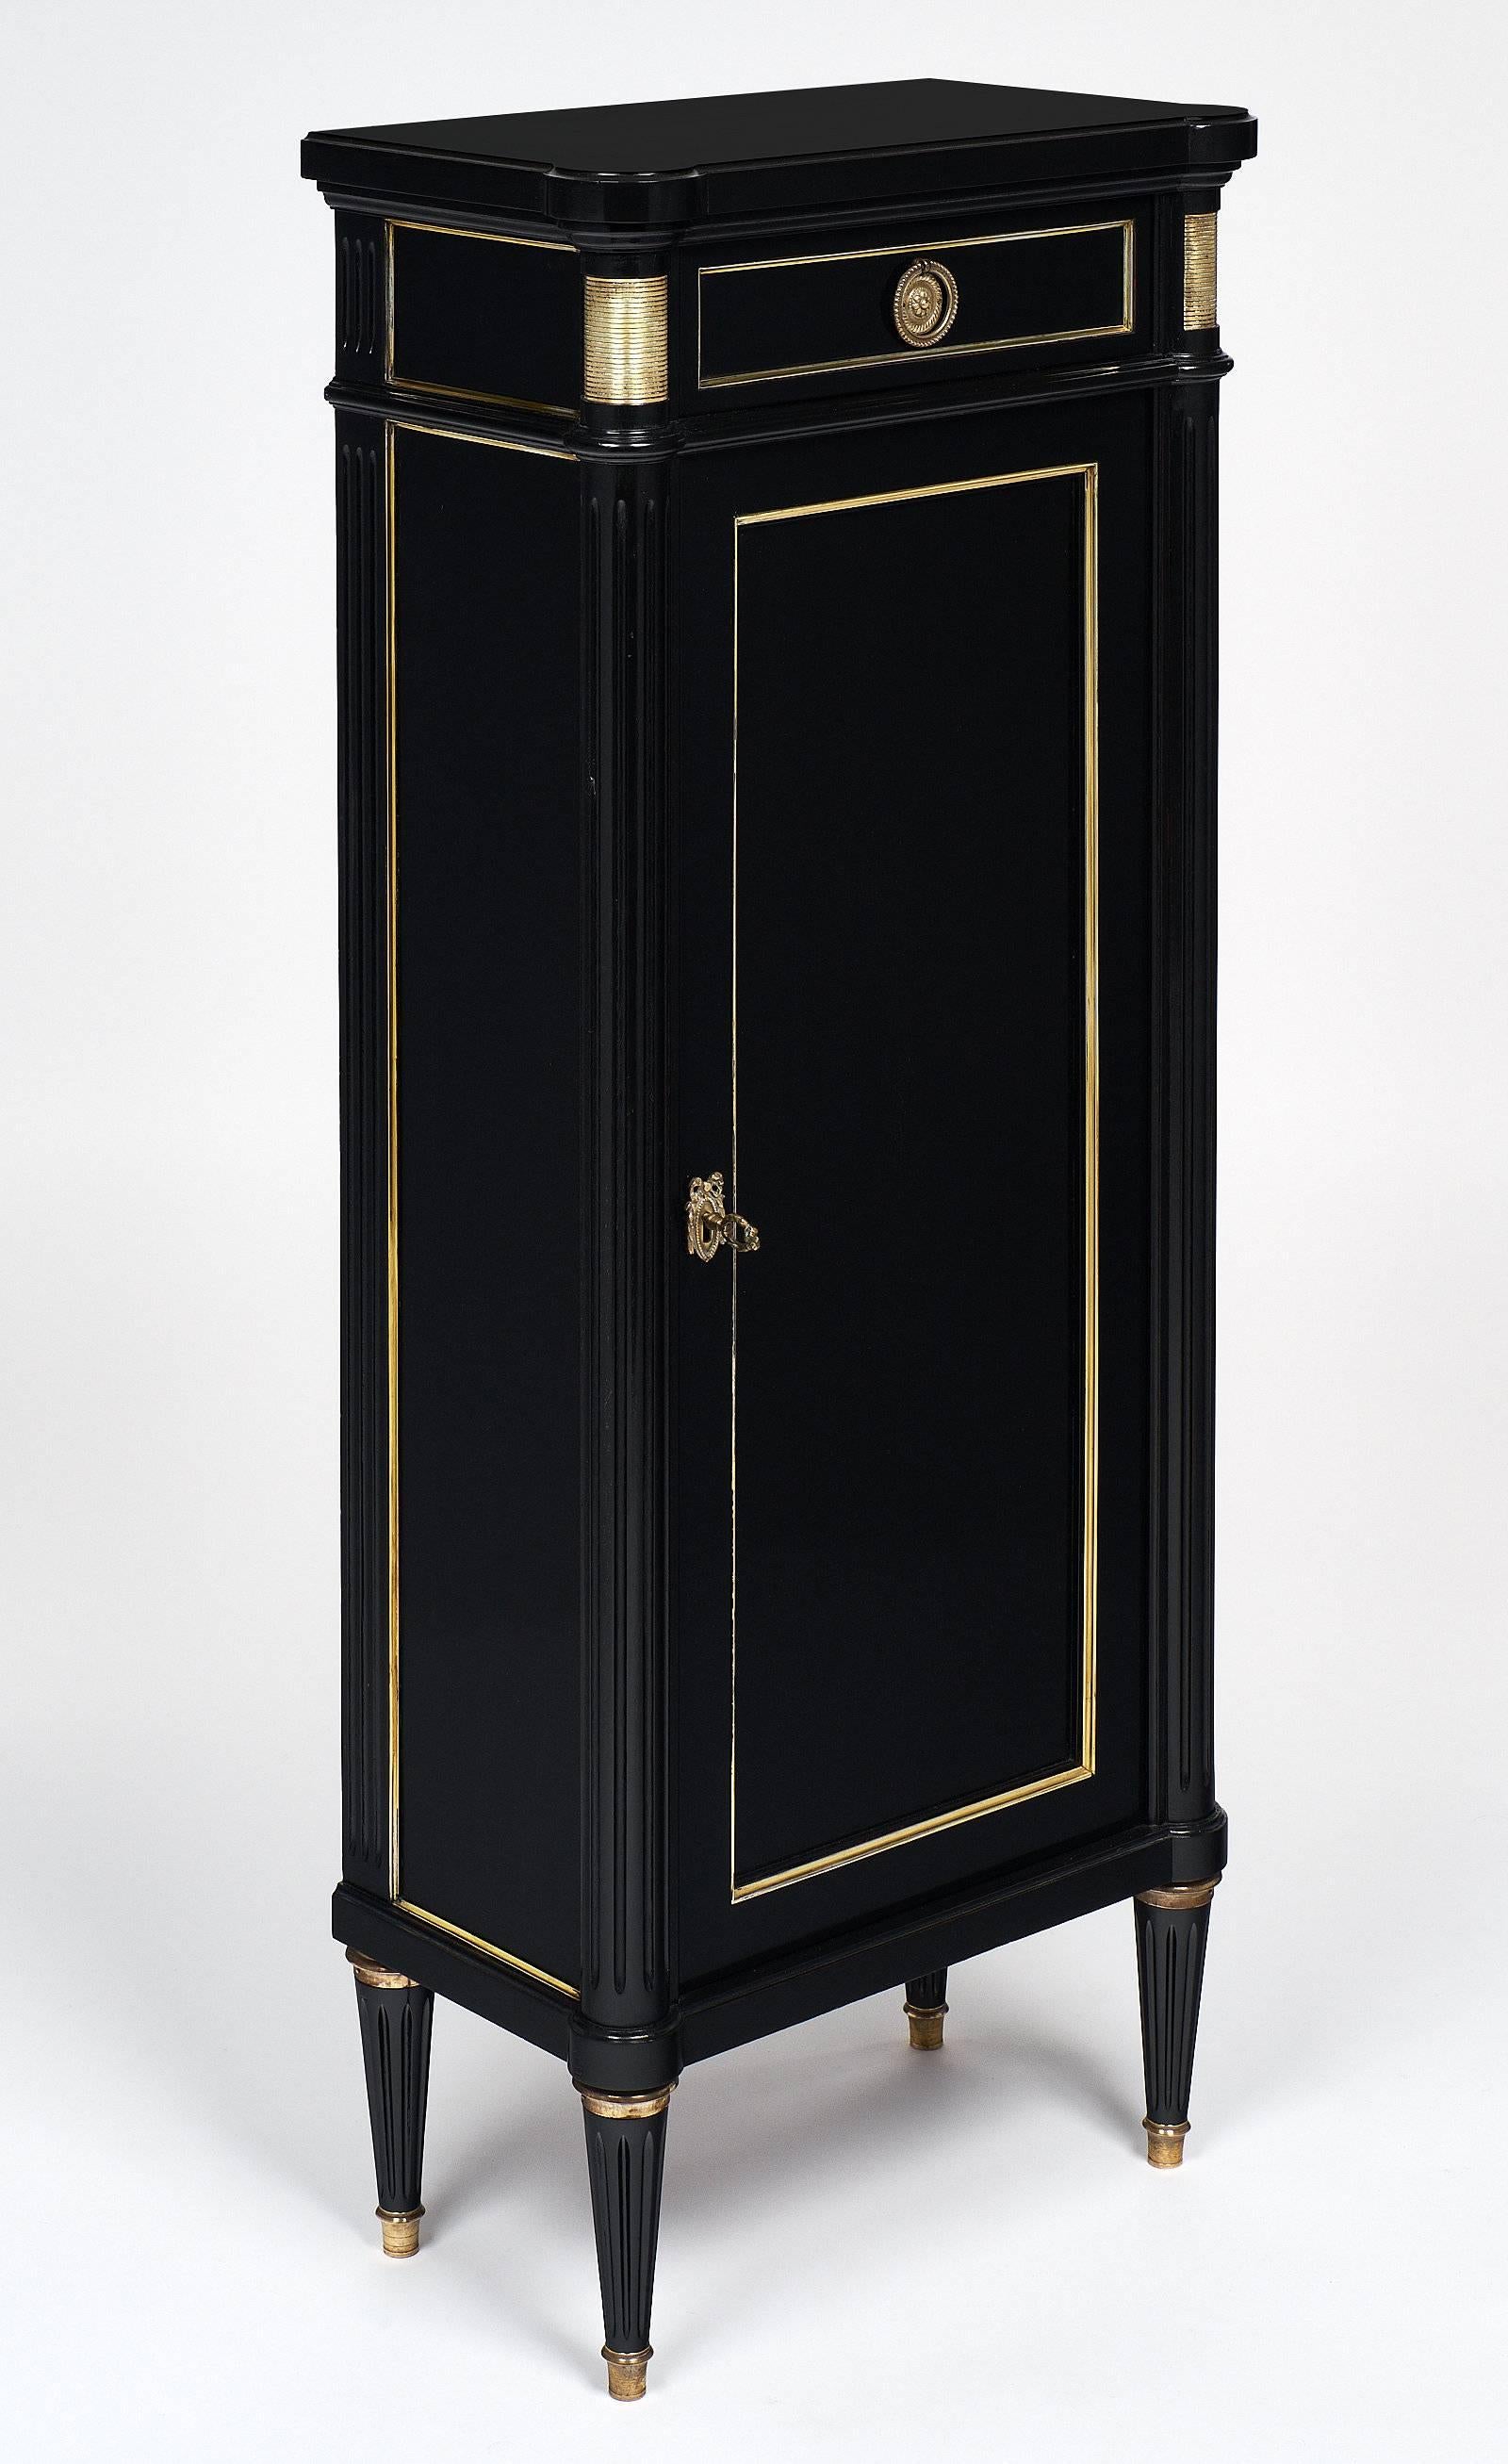 Elegant Louis XVI style cabinet made of mahogany that has been ebonized and finished with a French polish. This superb piece has wonderful proportions and a great size. The piece has brass trim and bronze hardware. One dove tailed drawer is located